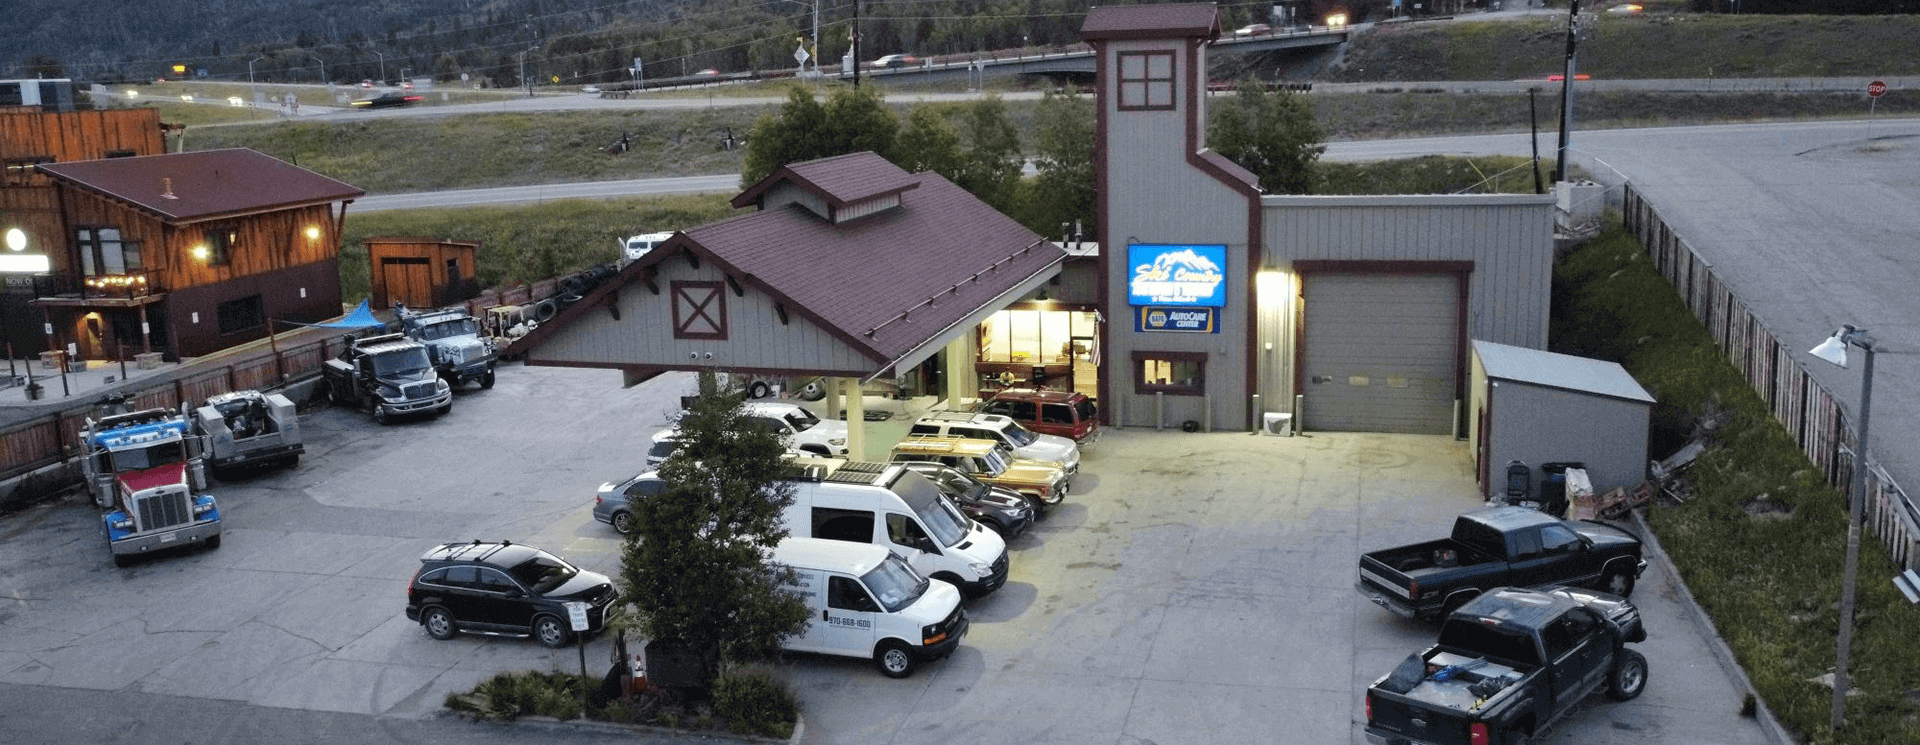 Ski Country Auto Repair and Towing Image